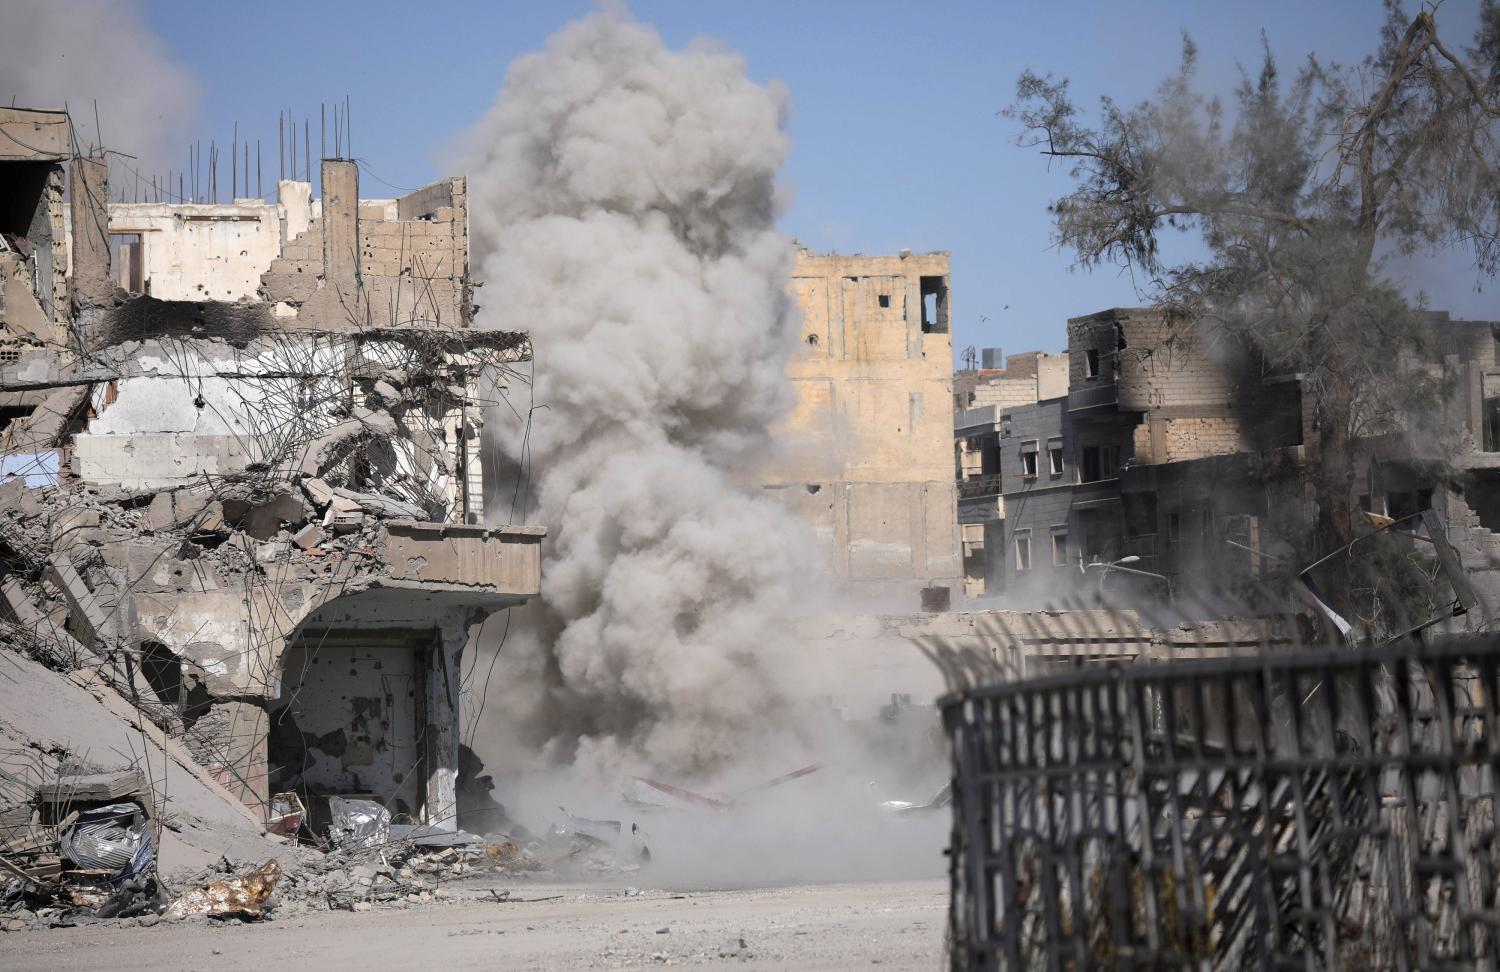 Smoke rises after a landmine exploded as fighters of Syrian Democratic Forces are clearing roads after liberation of Raqqa, Syria October 18, 2017. REUTERS/Rodi Said - RC1CA83C2BB0